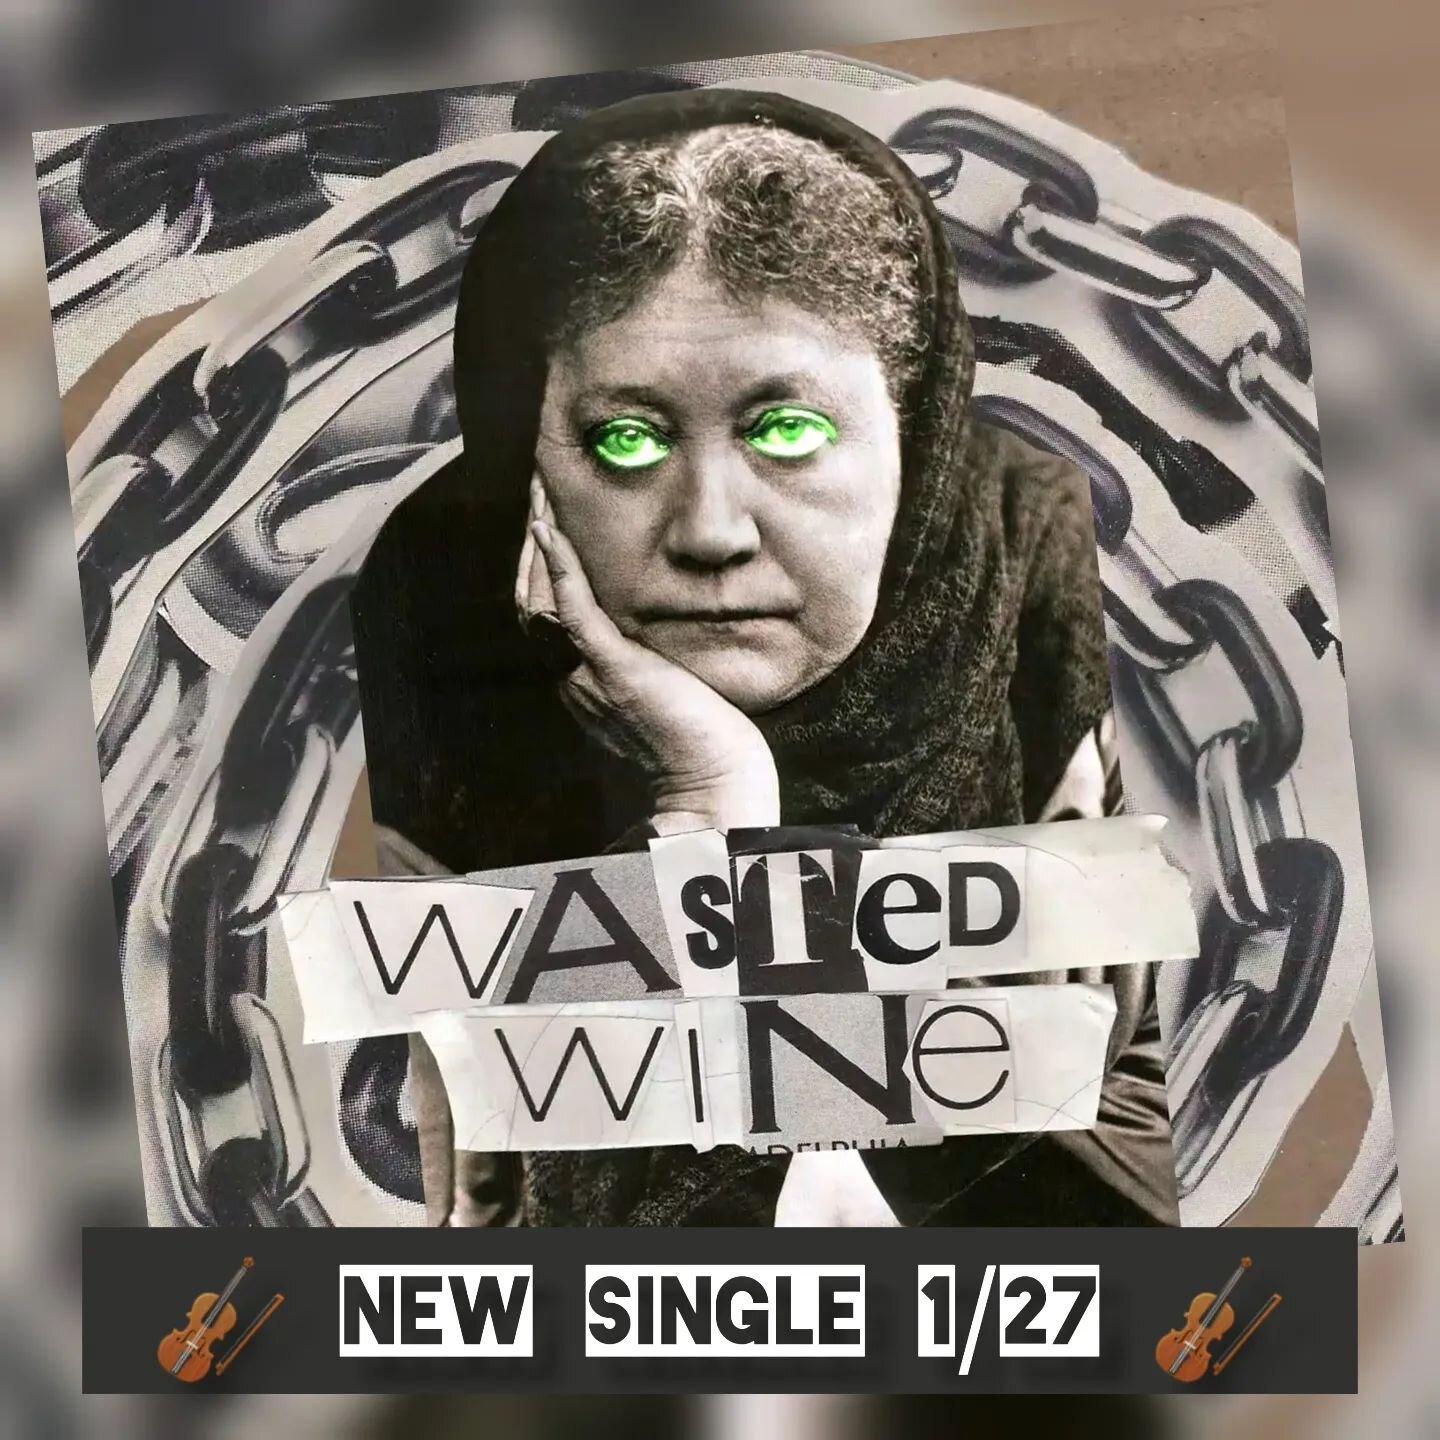 🚨❗ New Single Alert ❗🚨

More that proud to announce that we are releasing a brand new single on 1/27! 🎻

Wasted Wine's &quot;Madame Blavatsky&quot; is a captivating tribute to the famous spiritual leader and founder of the Theosophical Society. Wi